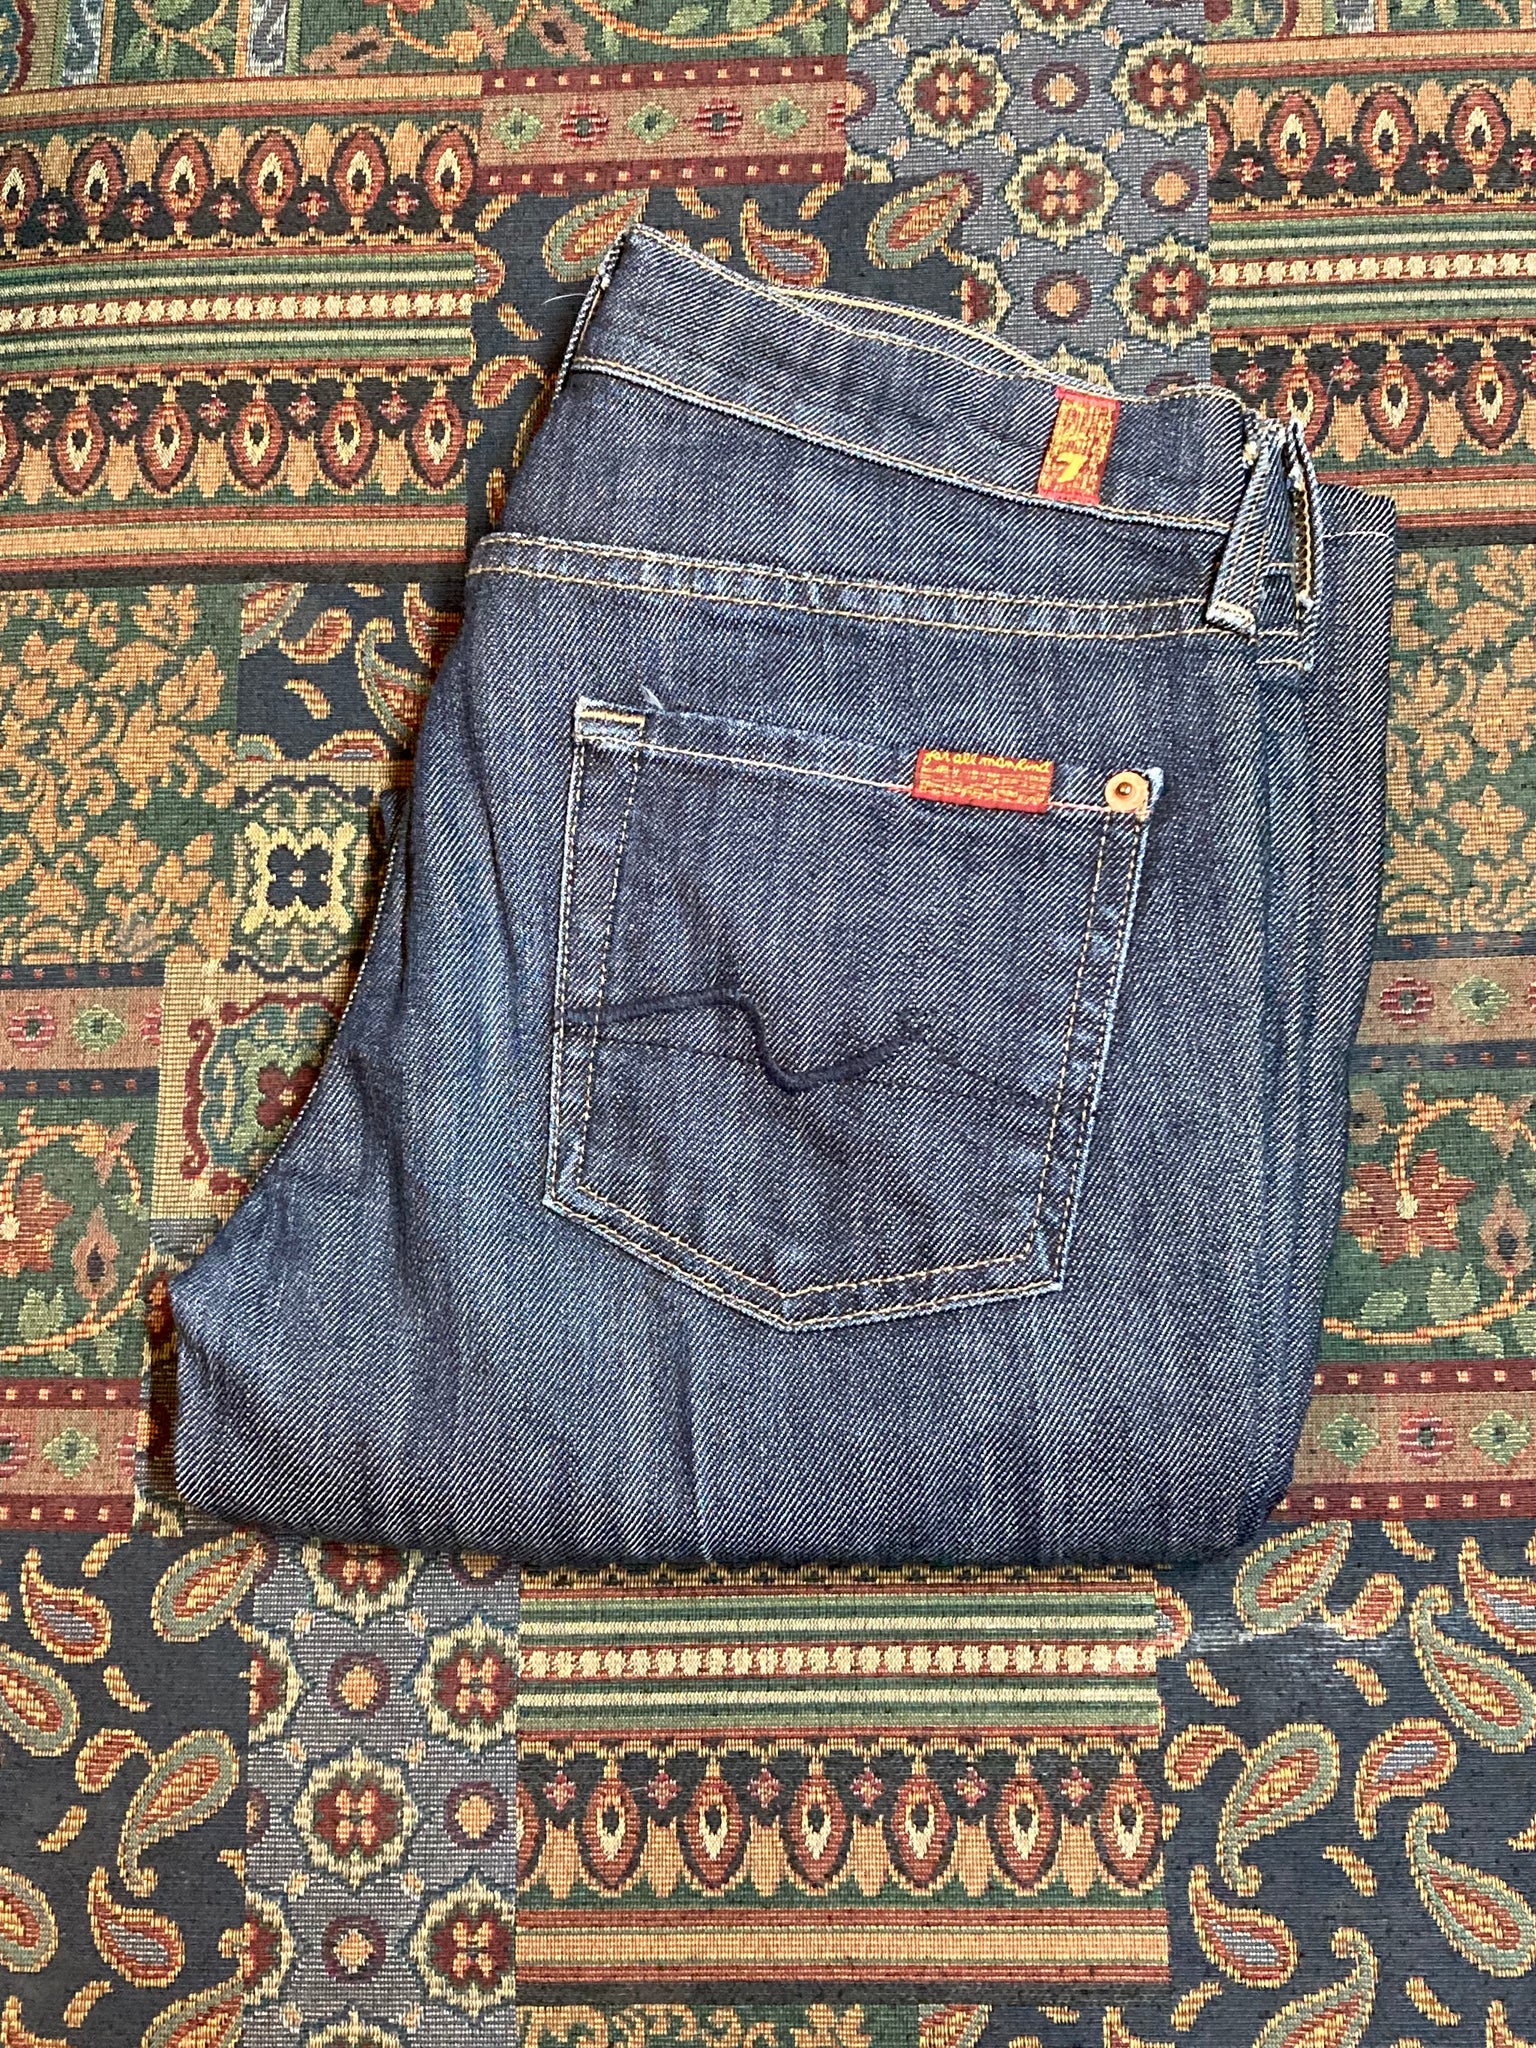 7 For All Mankind A Pocket Jeans